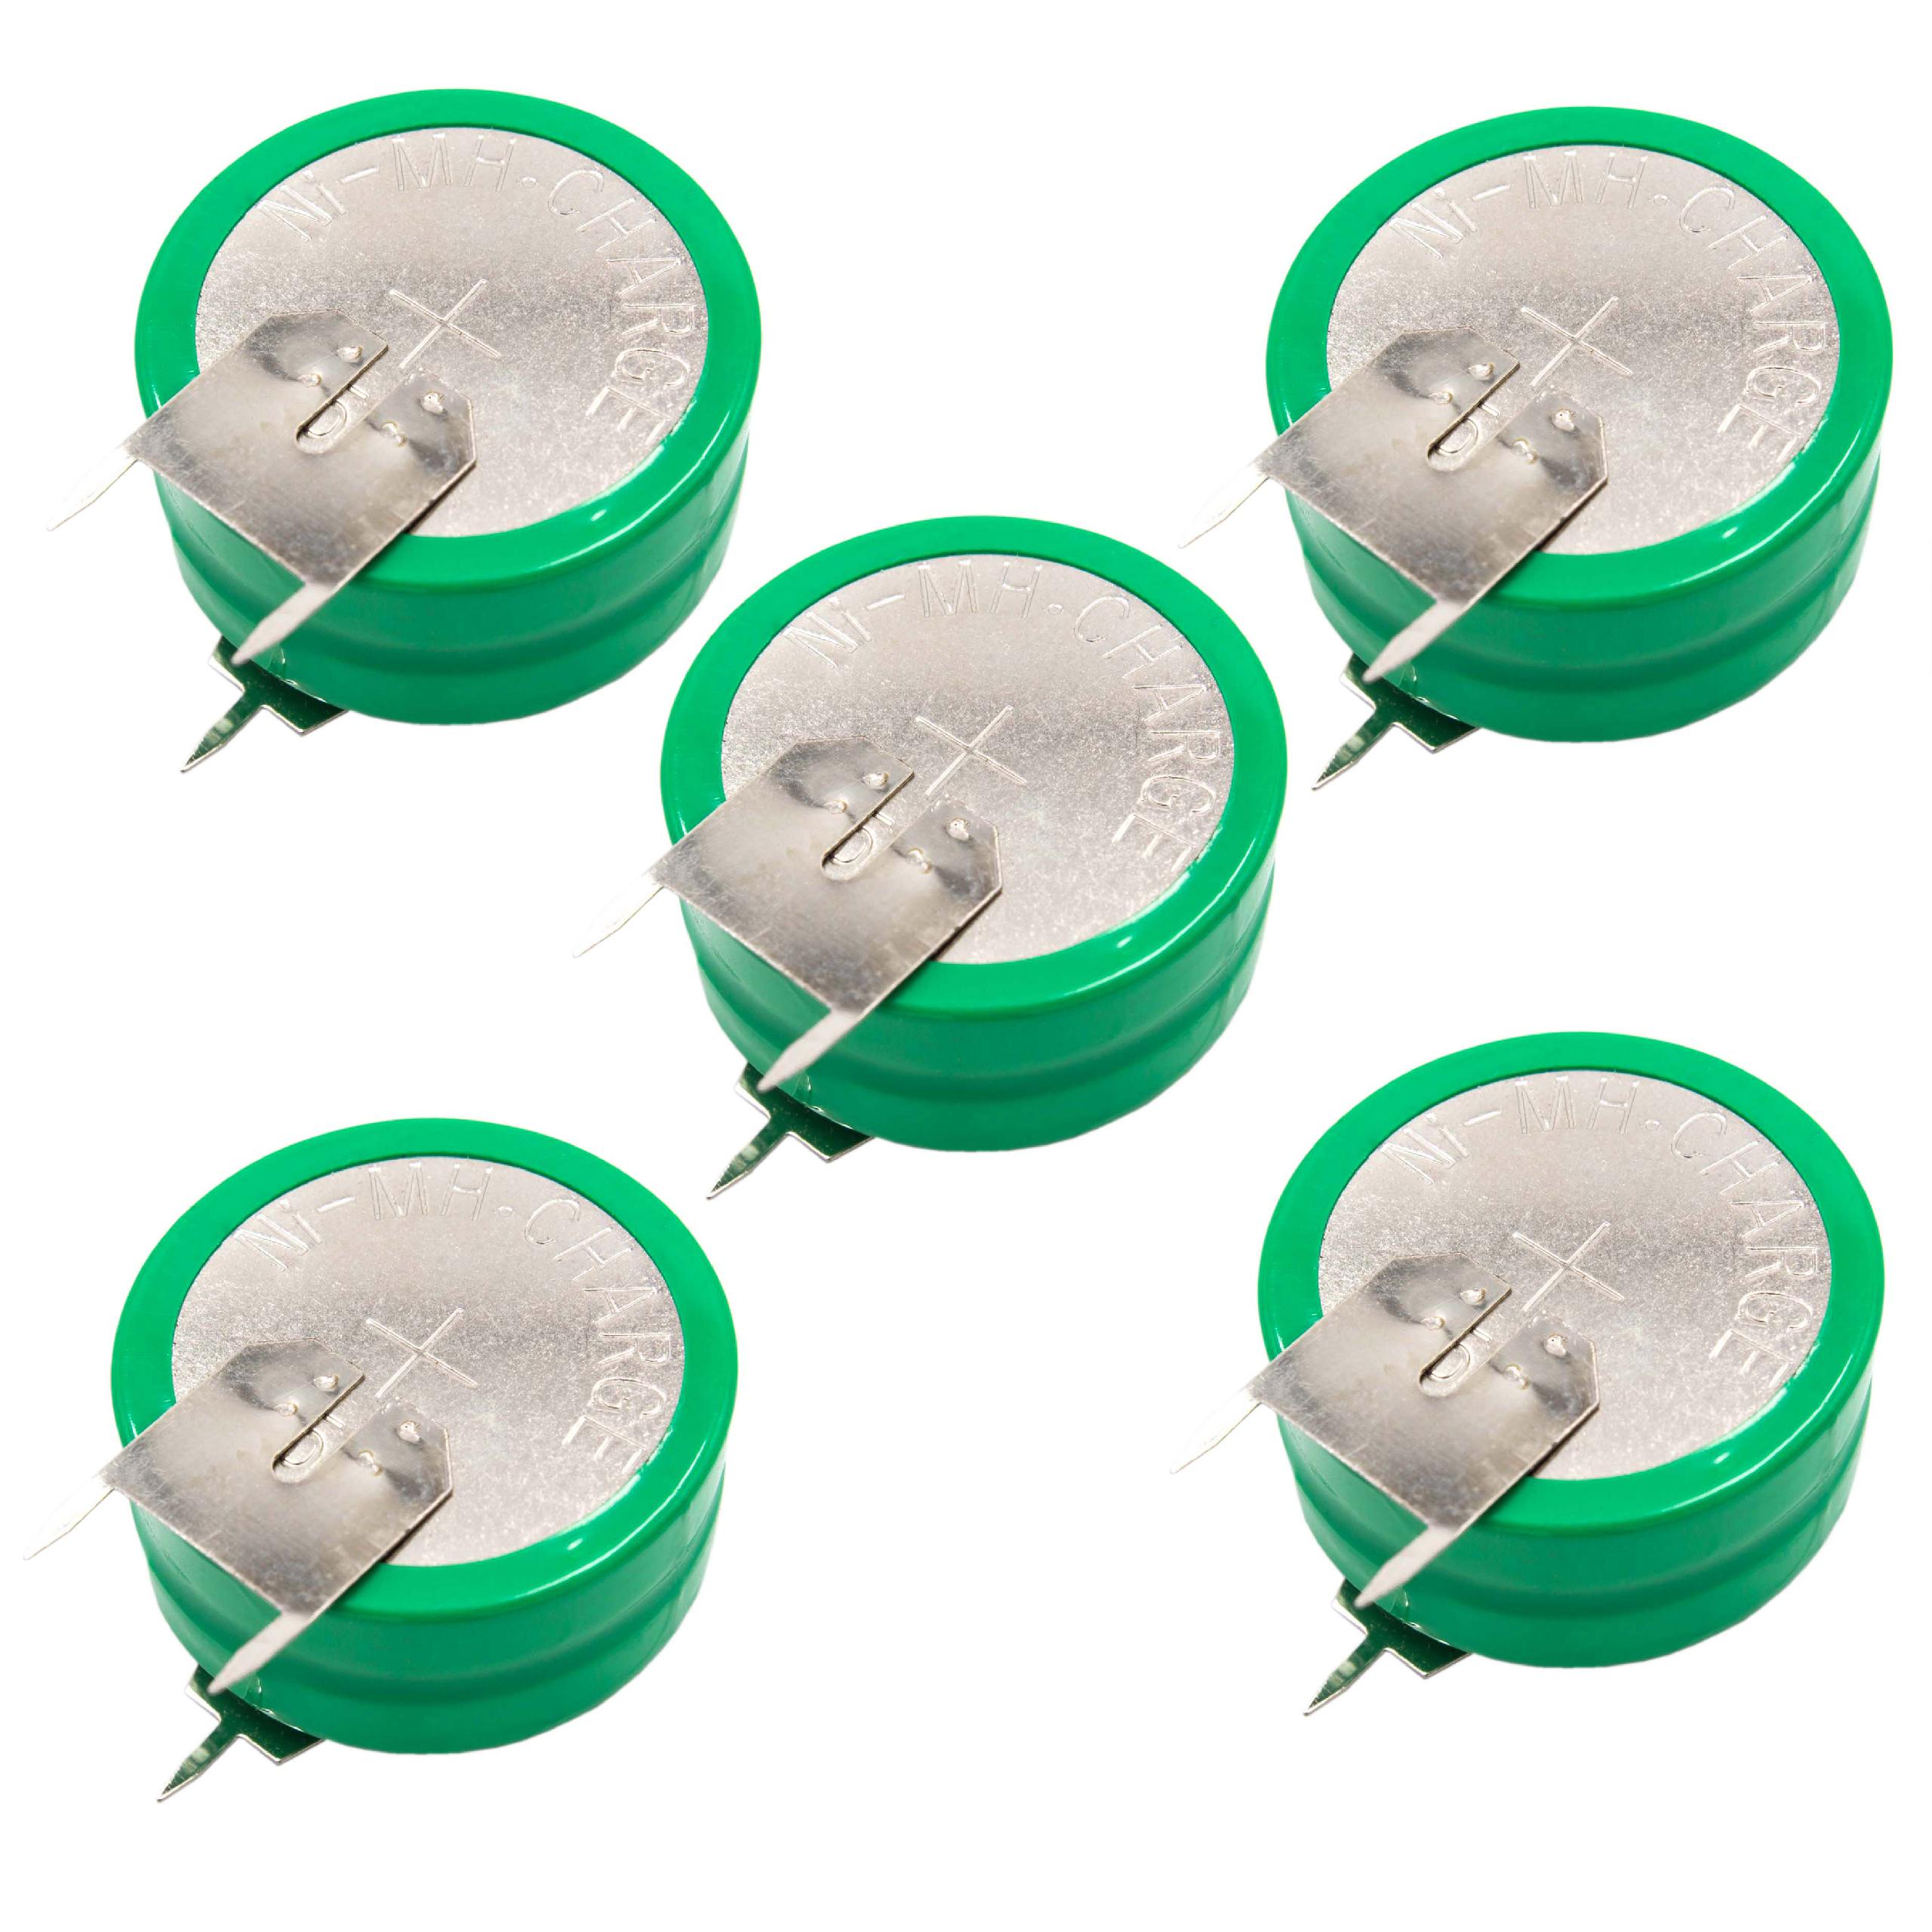 5x Button Cell Battery (2x Cell) Type 2/V250H 3 Pins for Model Building Solar Lamps etc. - 250mAh 2.4V NiMH